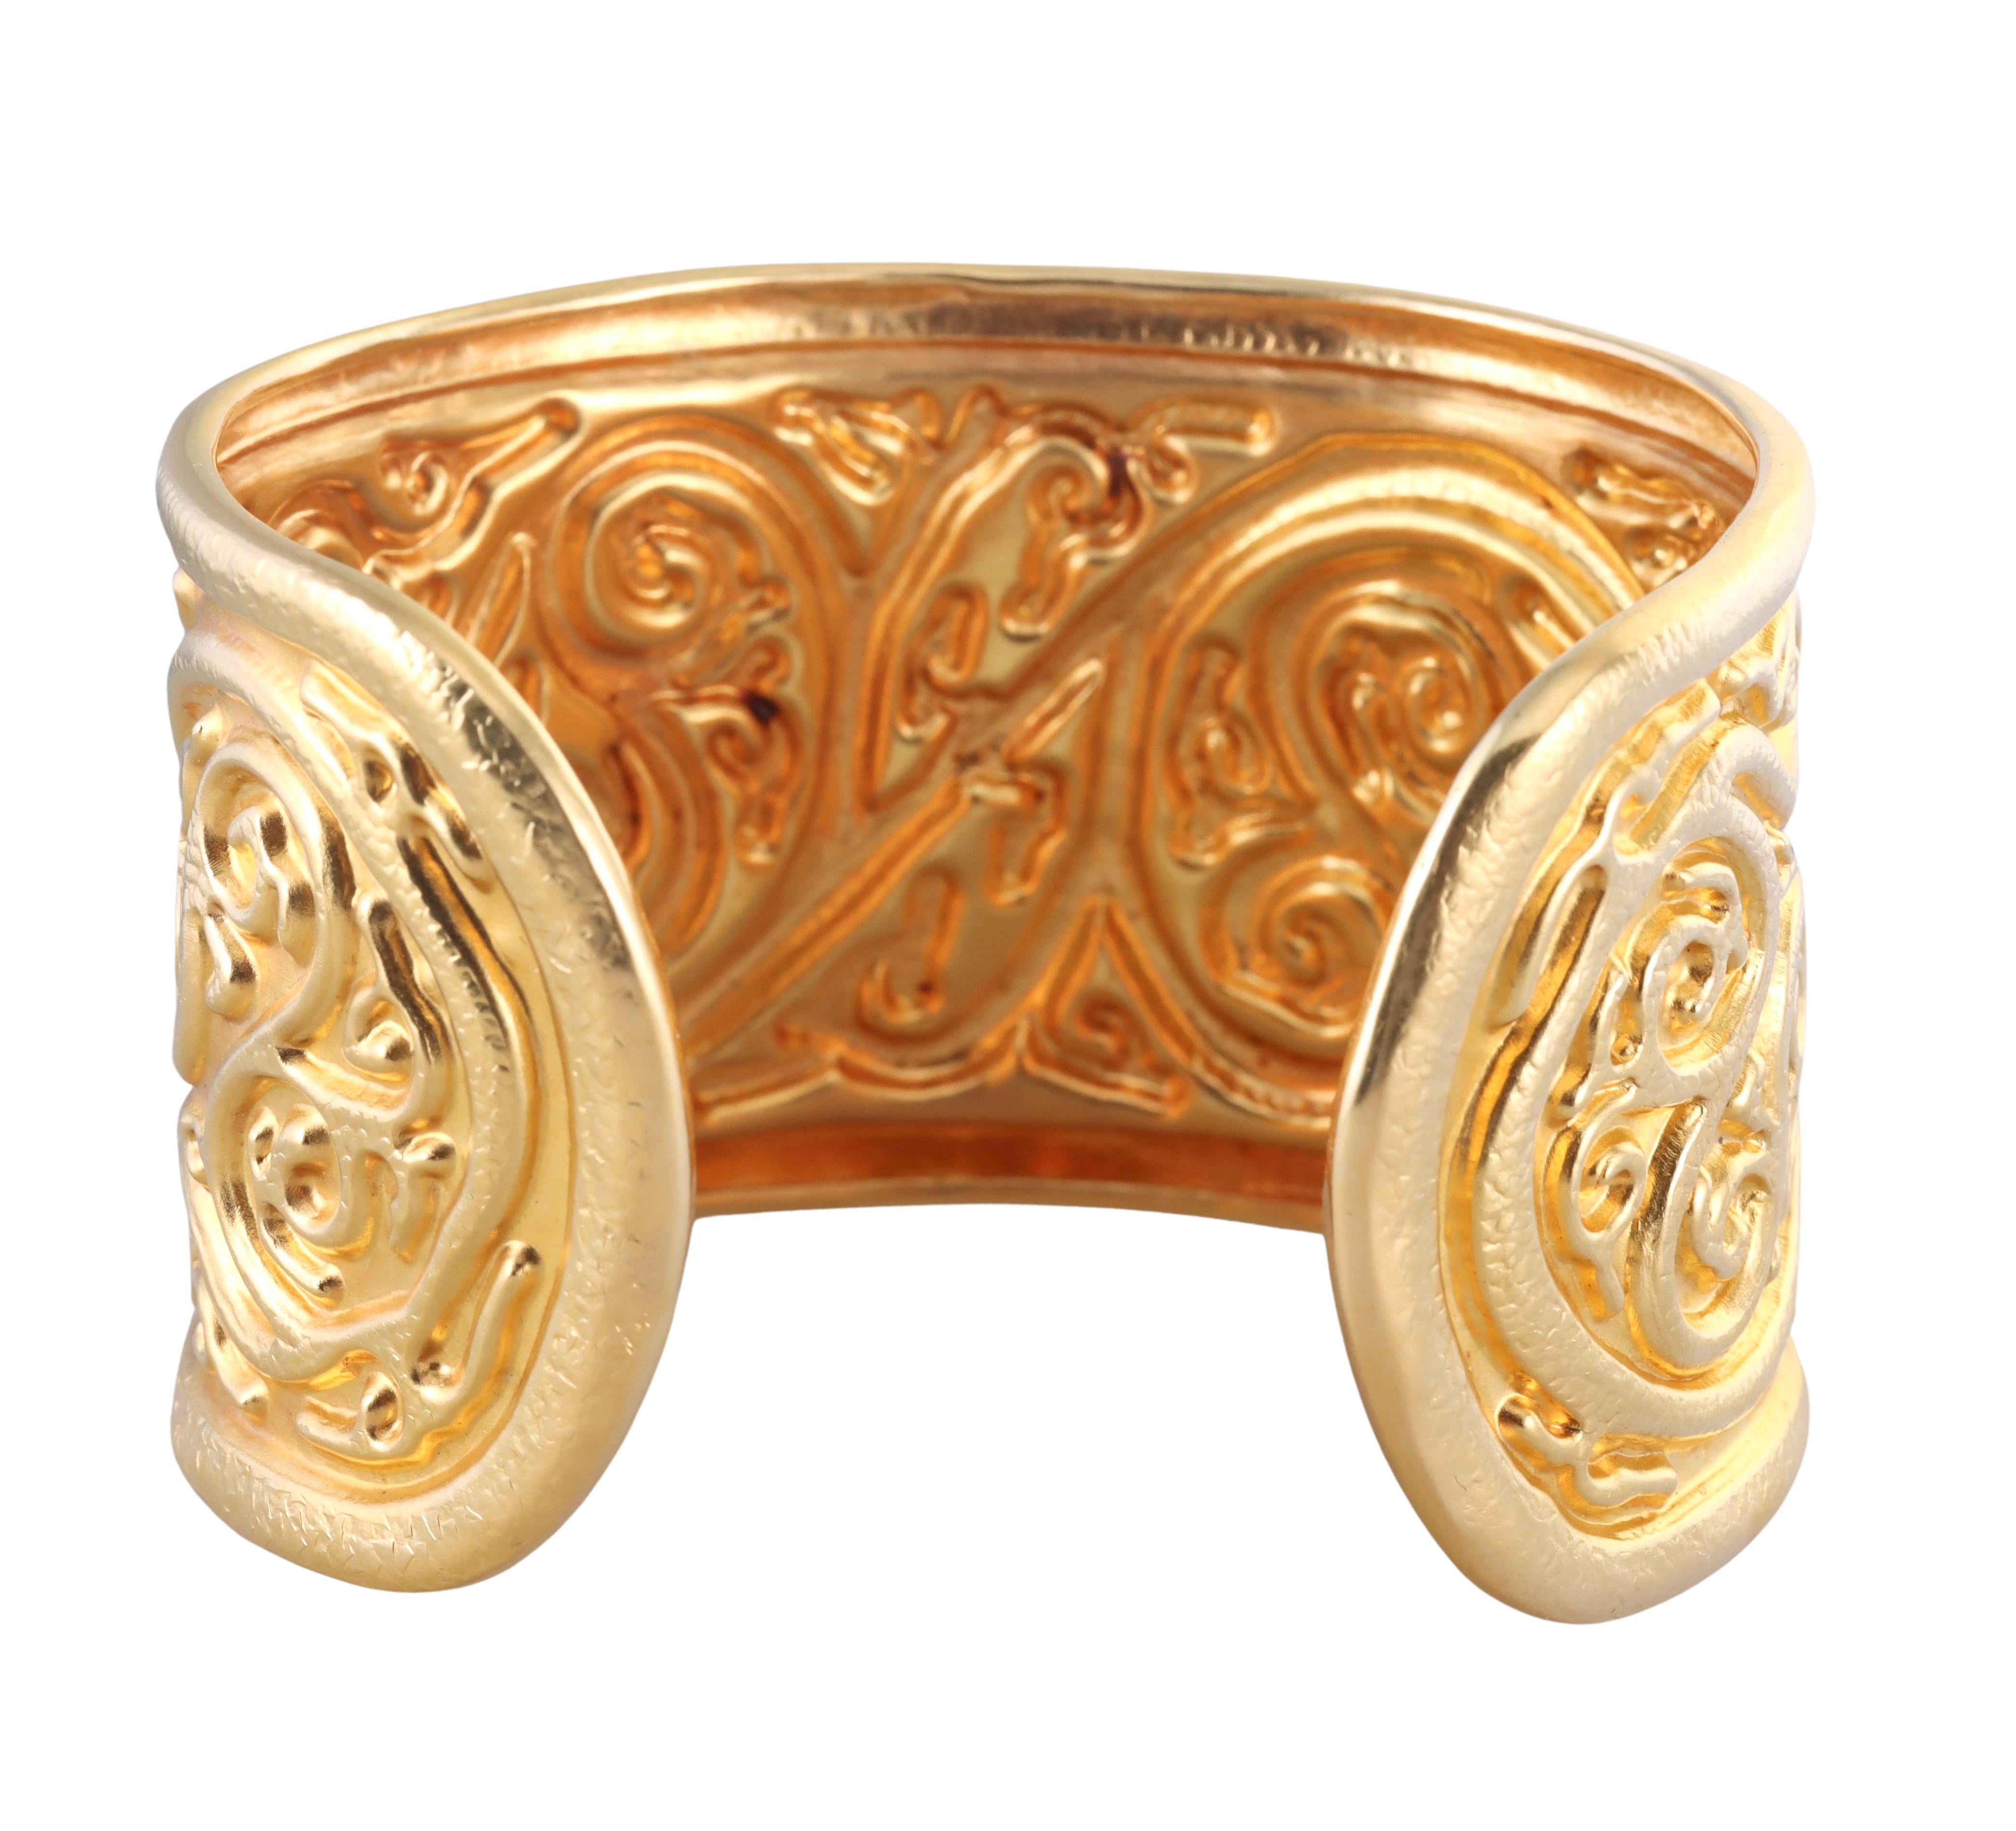 Lalaounis of Greece Gold Cuff Bracelet In Excellent Condition For Sale In New York, NY